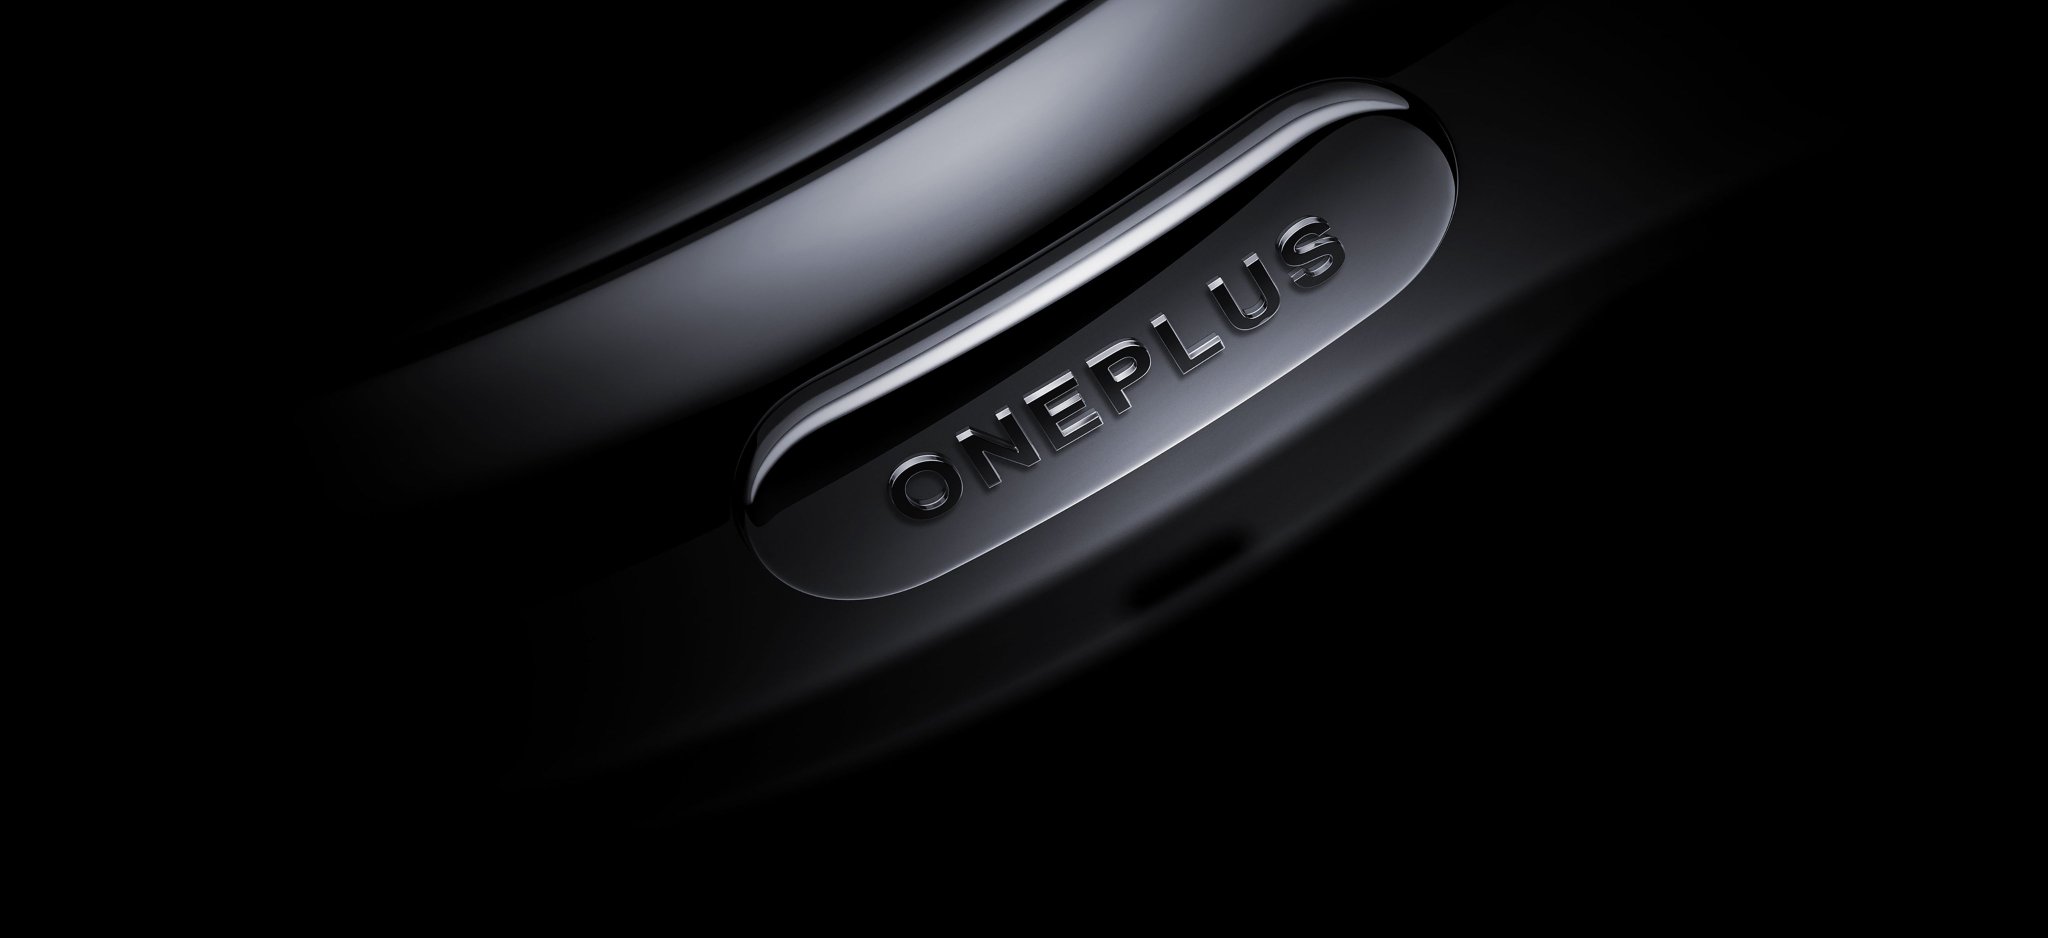 The OnePlus 9 Pro's Fluid Display 2.0 receives an A+ from DisplayMate as  LTPO panel with a variable refresh rate is confirmed -   News